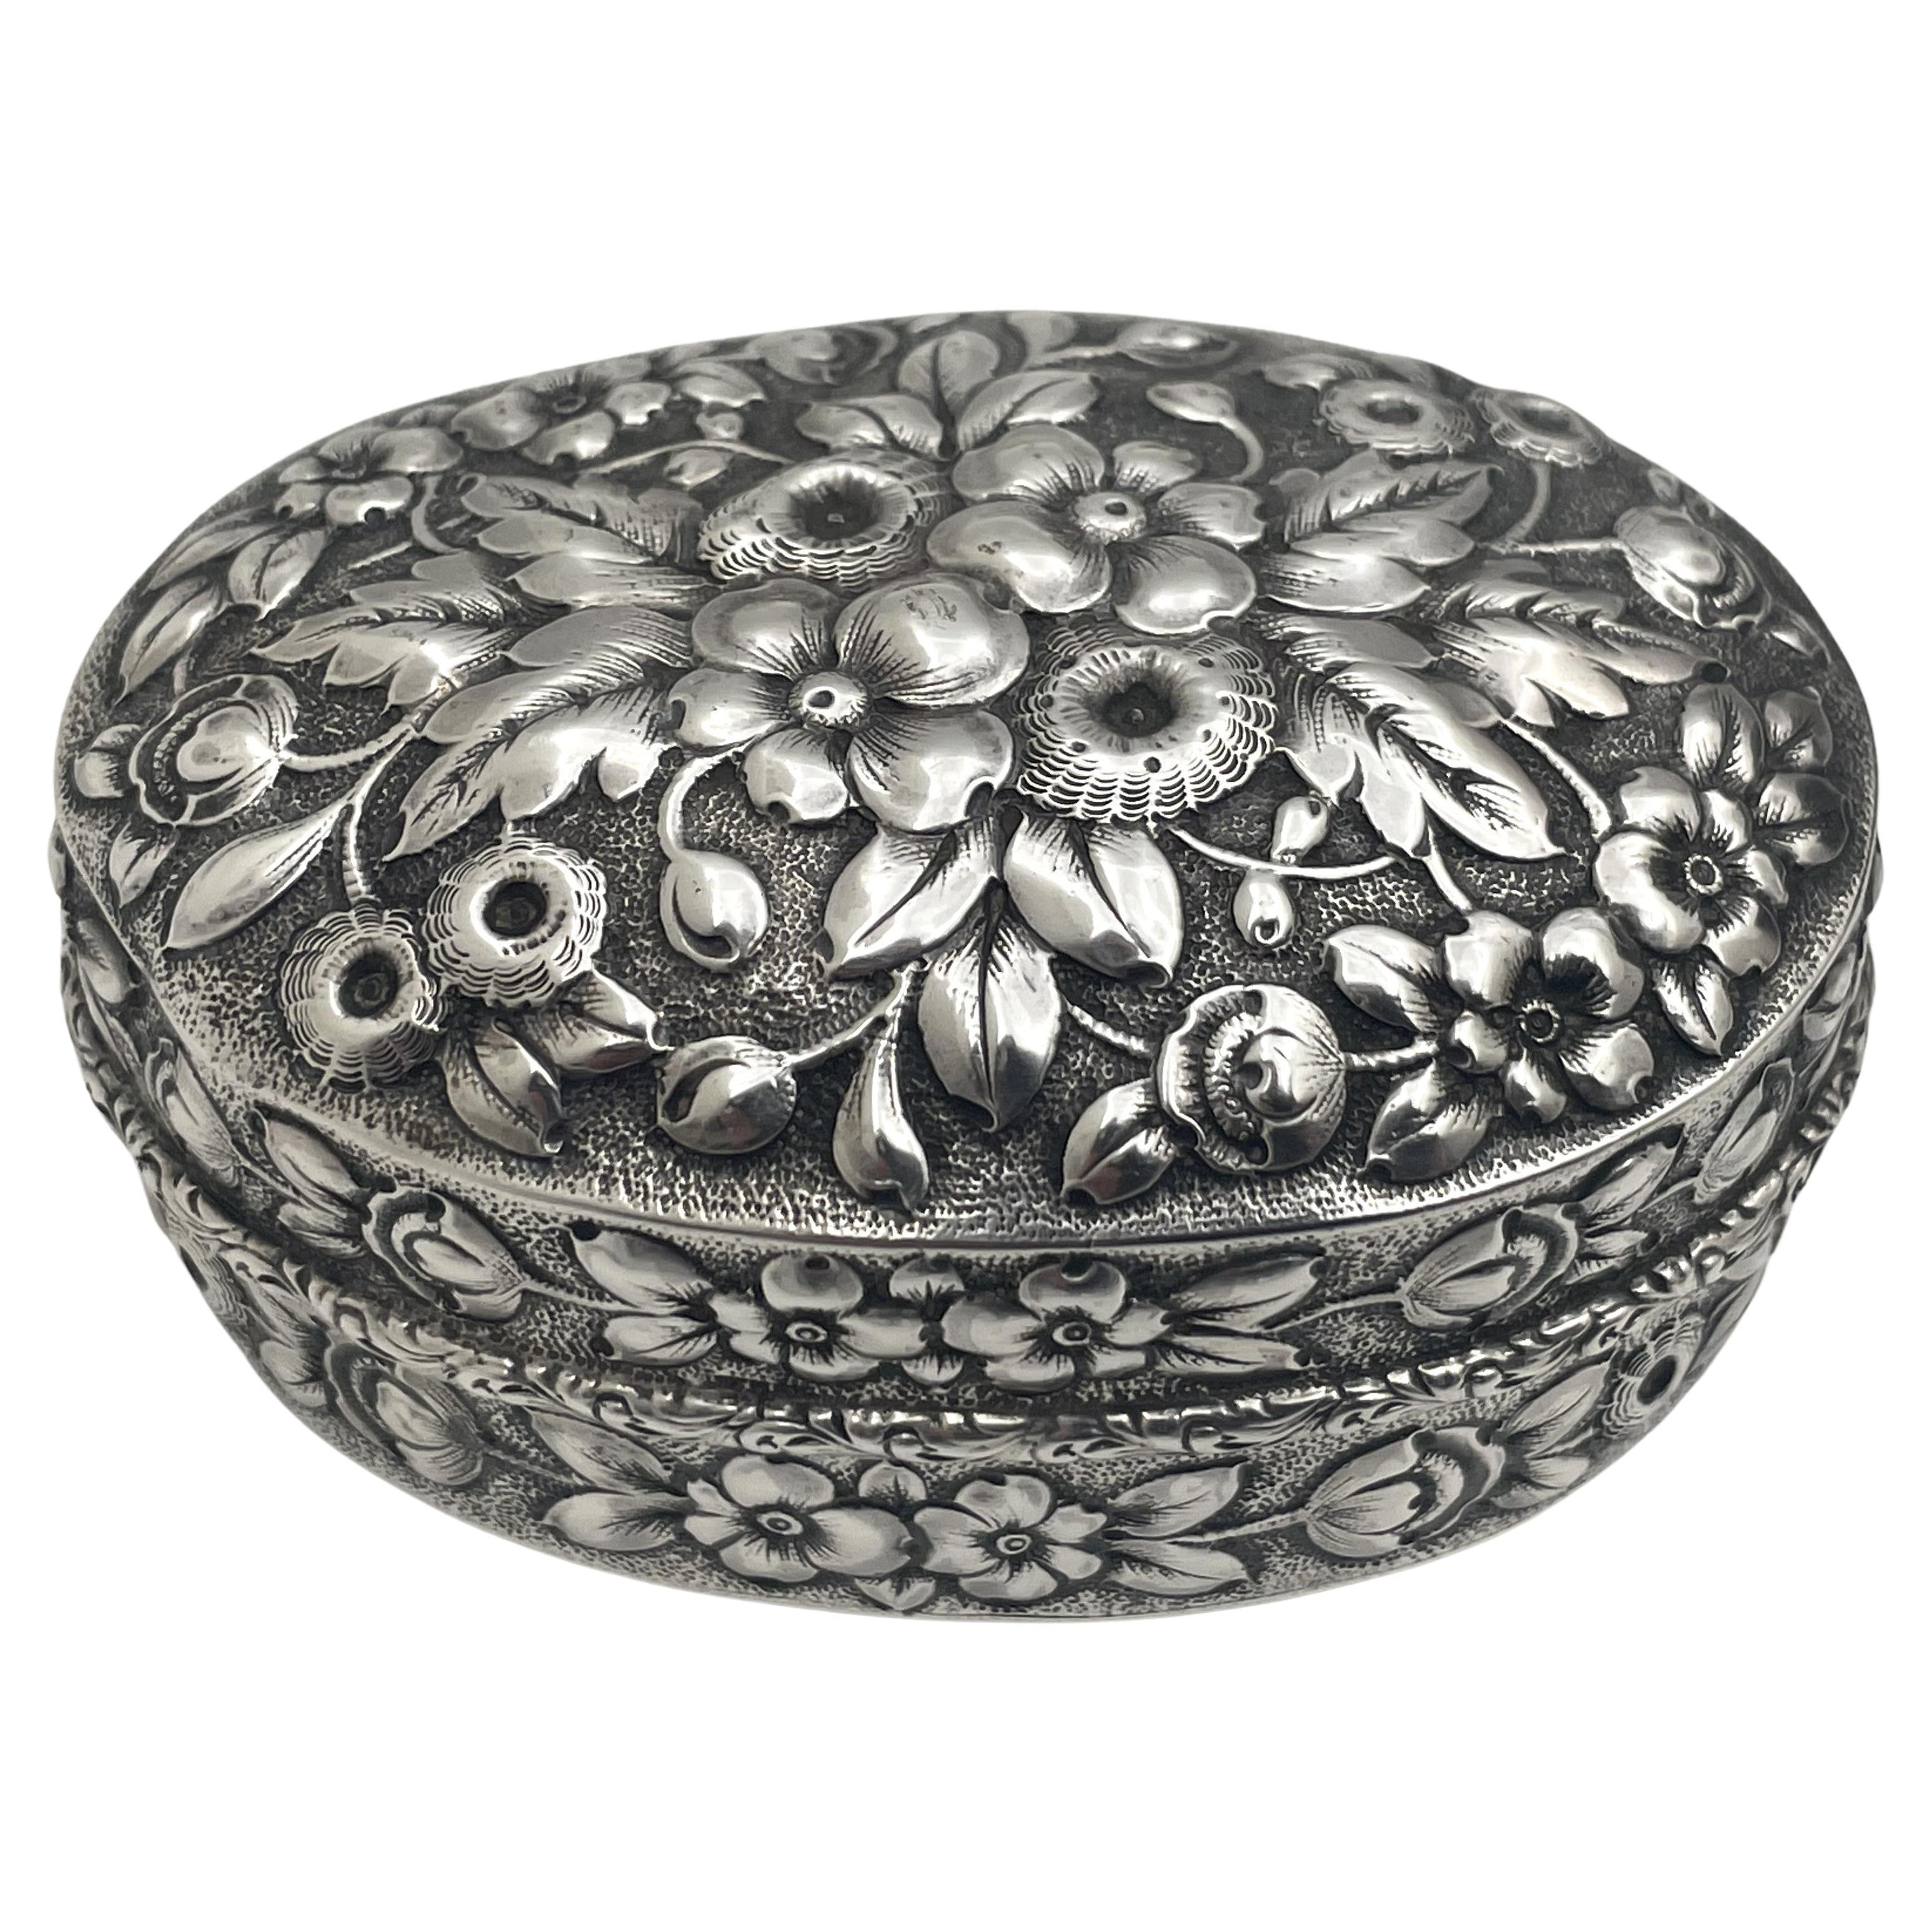 Dominick & Haff / Bailey, Banks & Biddle Sterling Silver Oval Repousse Snuff Box For Sale